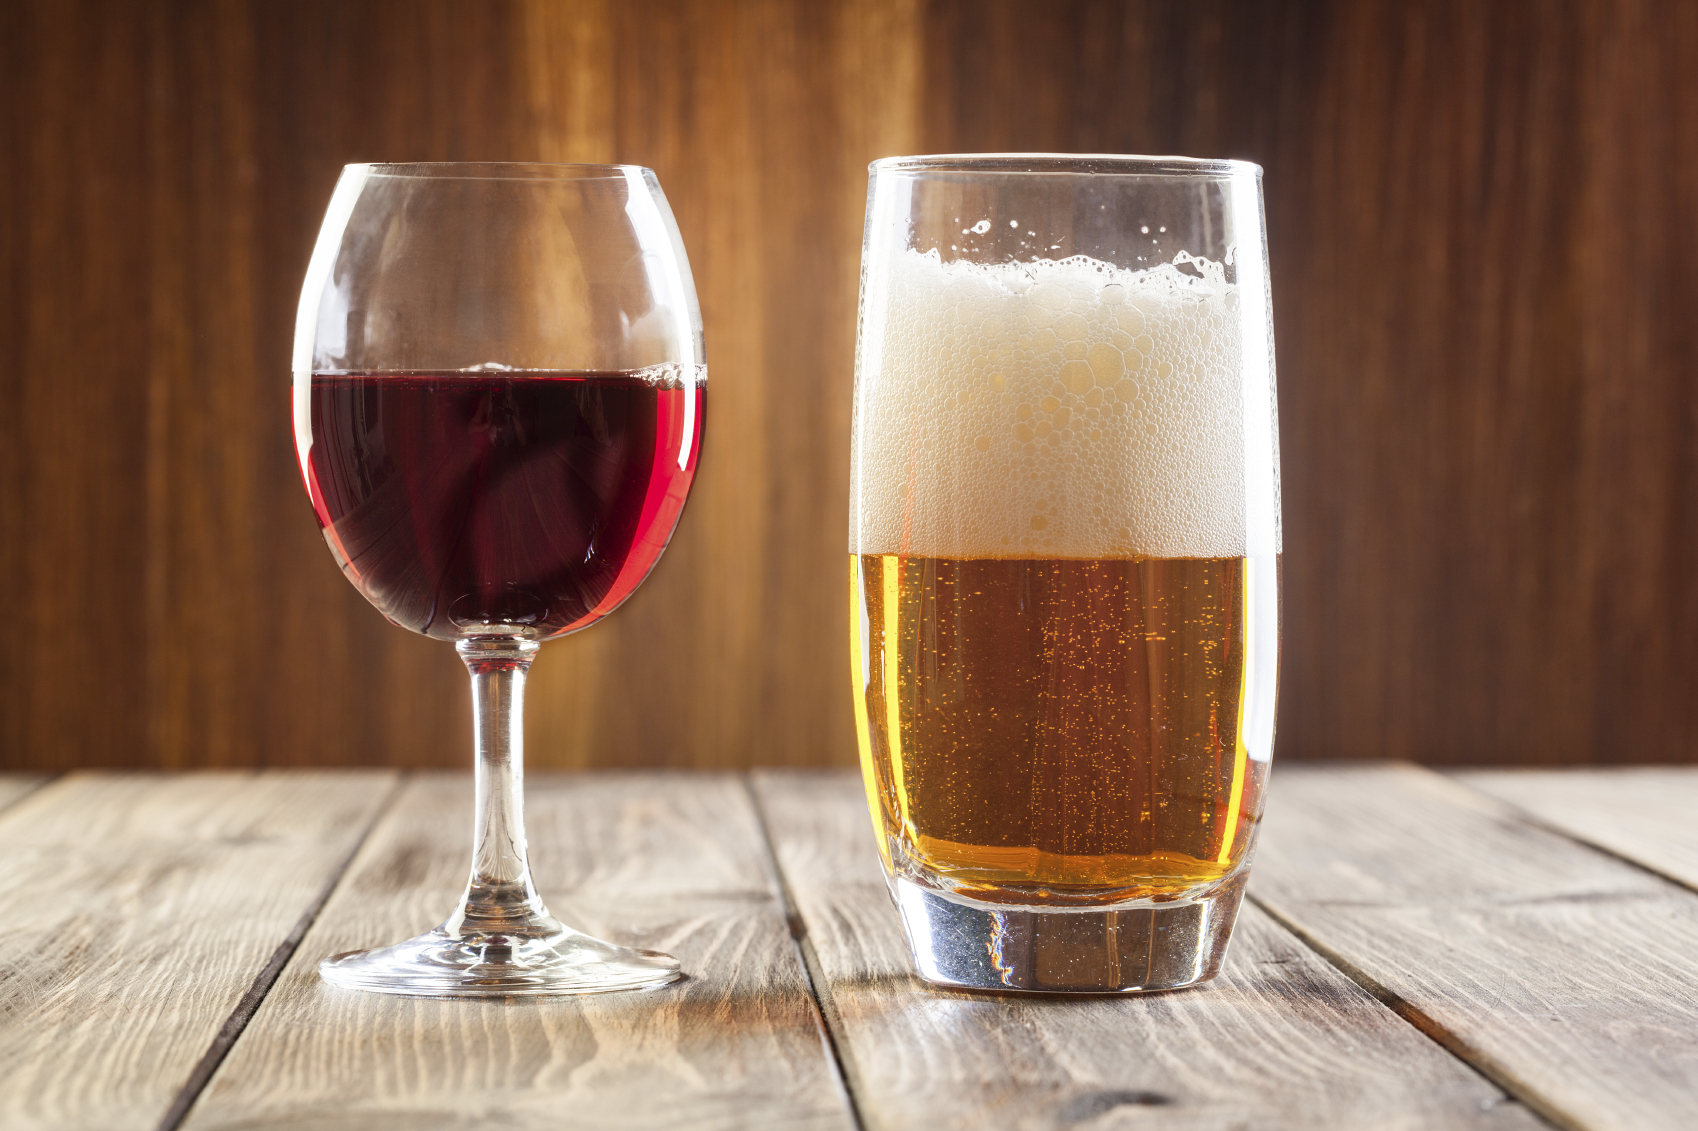 You know drinking the right amount of alcoholic beverages comes with heart-boosting benefits… But new research from Harvard reveals the amount where heart perks can turn to dangers.